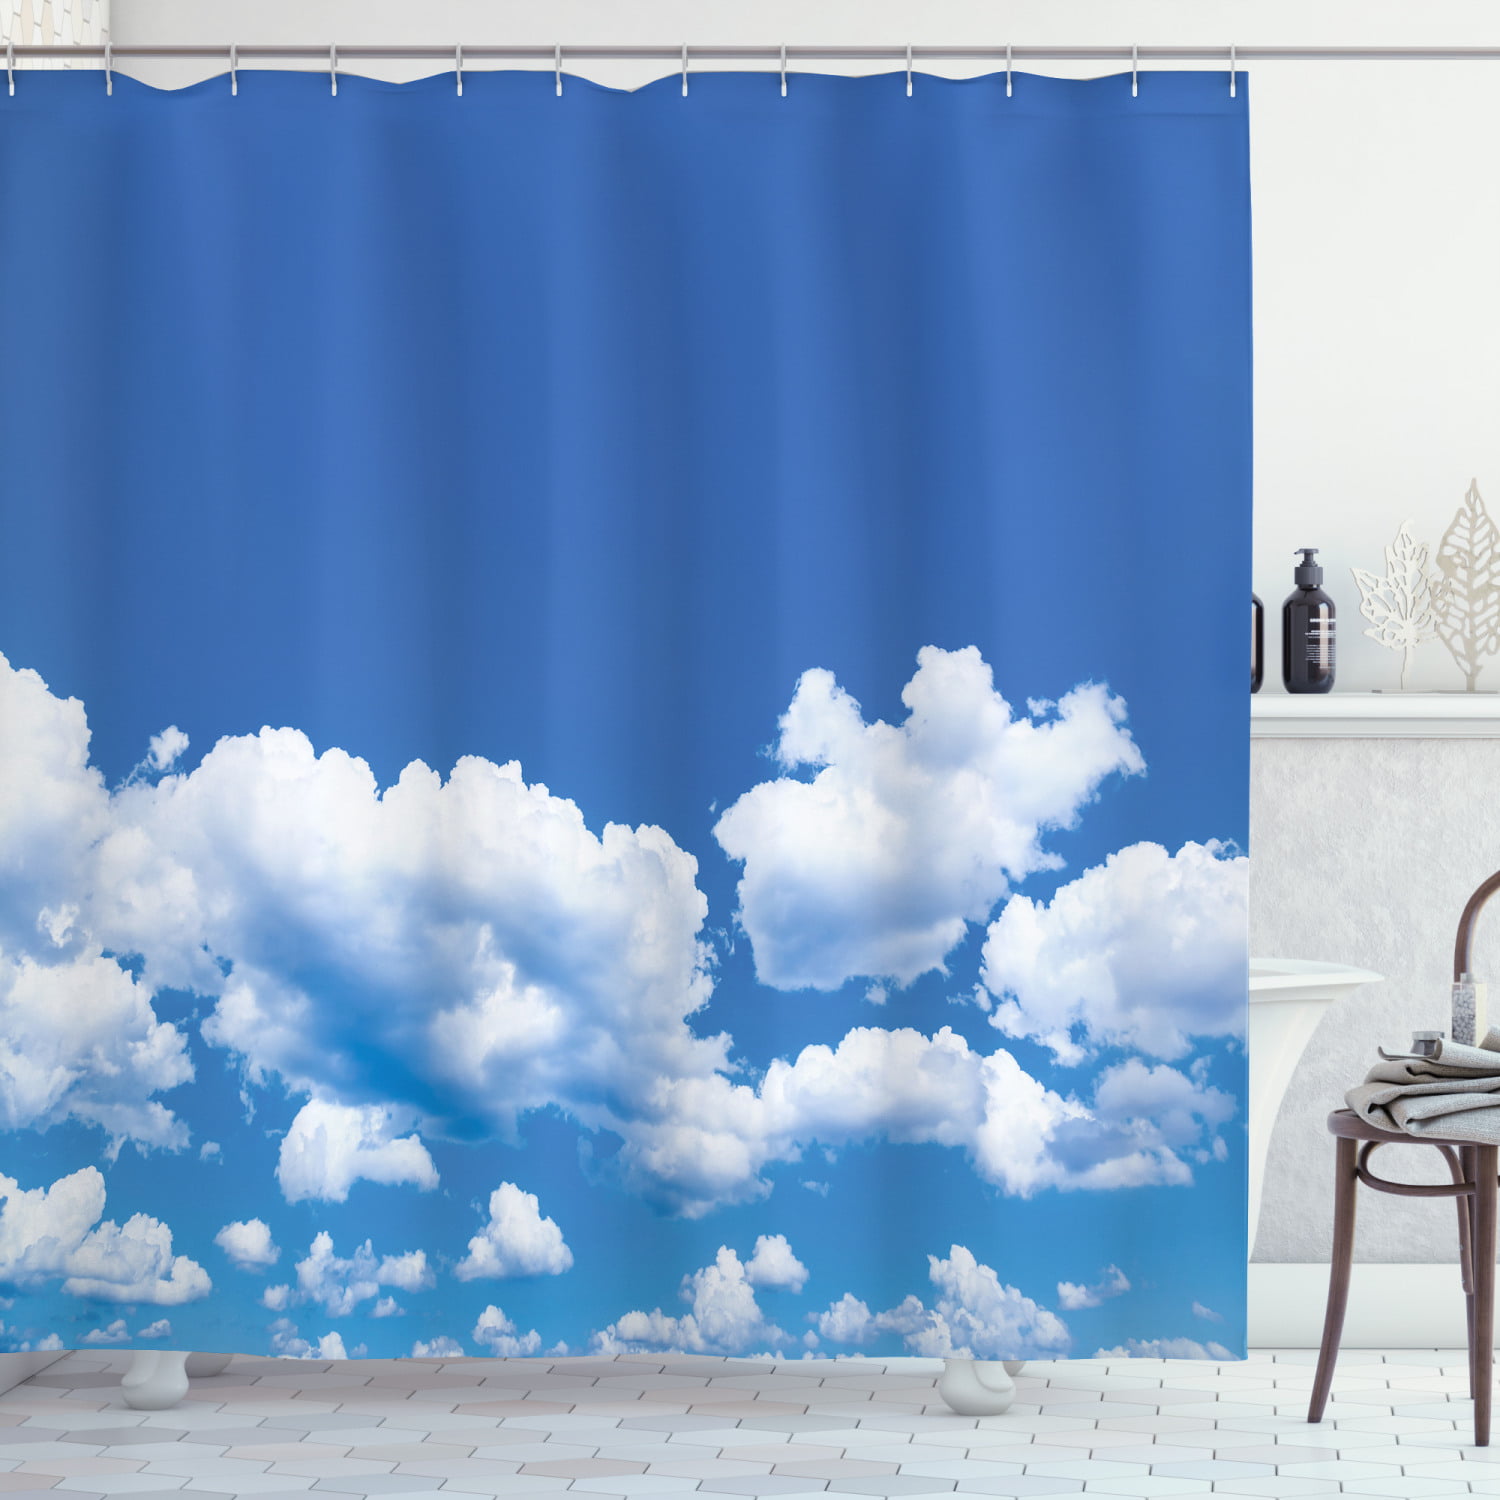 Details about   Flower Hell Waterproof Bathroom Polyester Shower Curtain Liner Water Resistant 